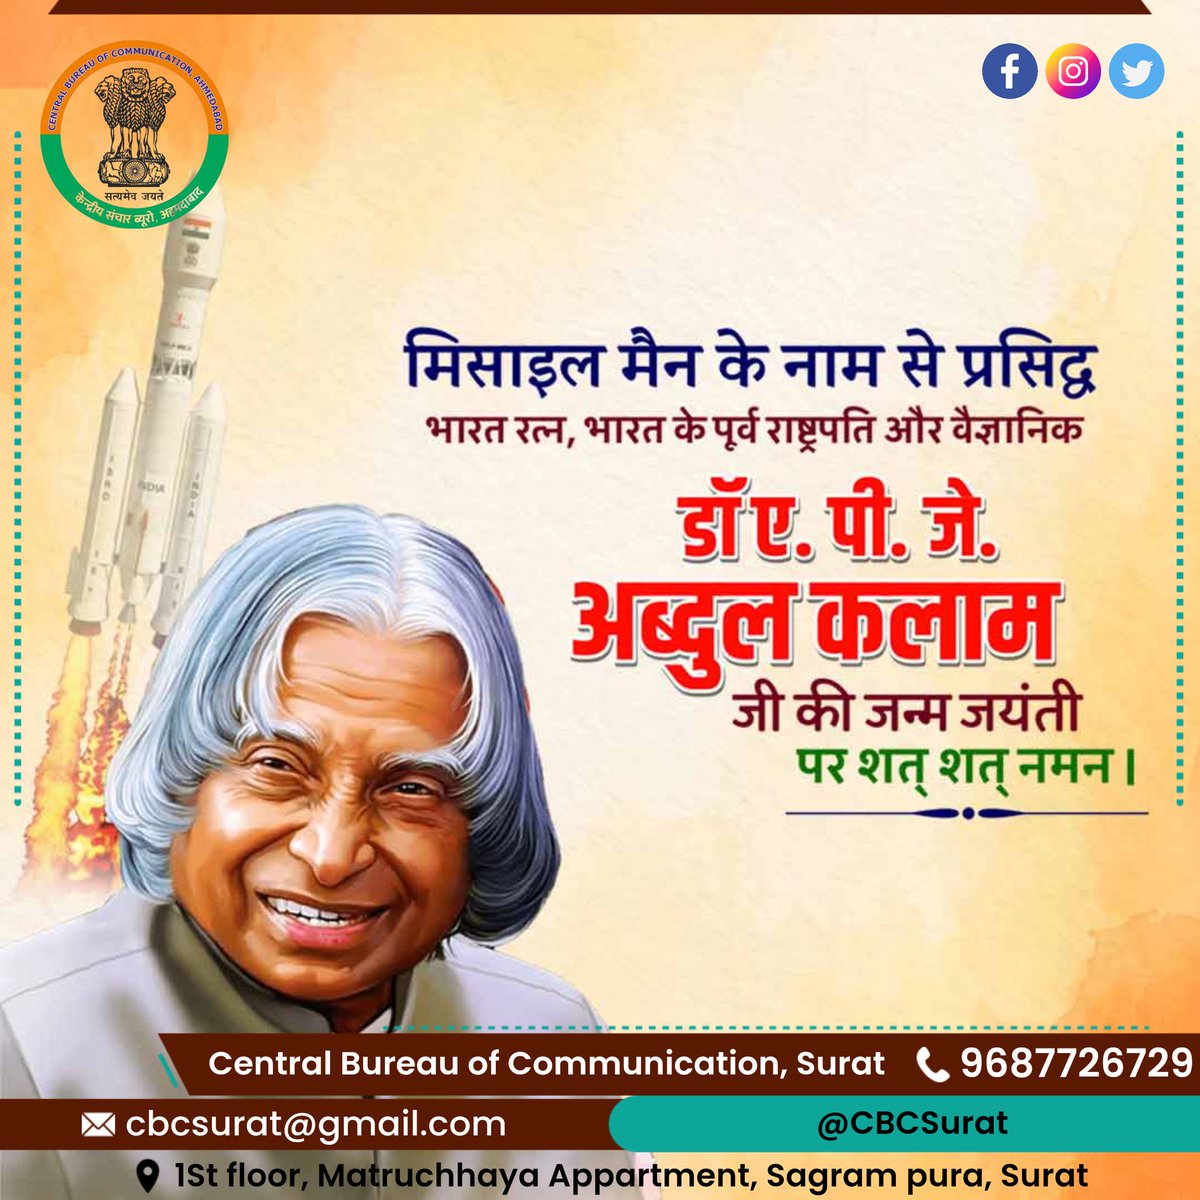 Tributes to the #MissileManOfIndia, Dr. #APJAbdulKalam on his birth anniversary.

Fondly remembered as #PeoplesPresident, he continues to inspire many through his wisdom.

He will always be remembered for his monumental contribution to nation-building.